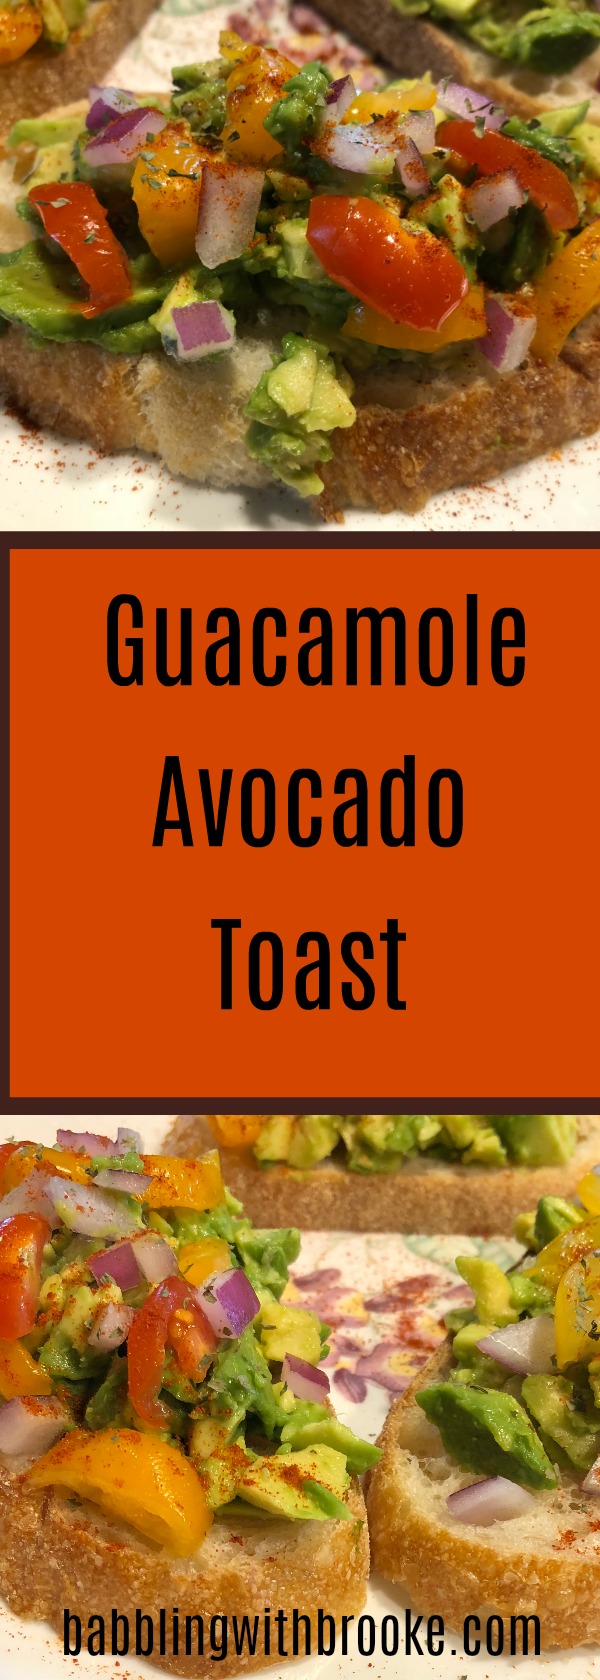 A healthy, easy and delicious meal or snack recipe! Avocados are a great source of nutrients and vitamins and make for a excellent snack or meal! #avocadotoast #guacamole #healthyrecipe #easyrecipe